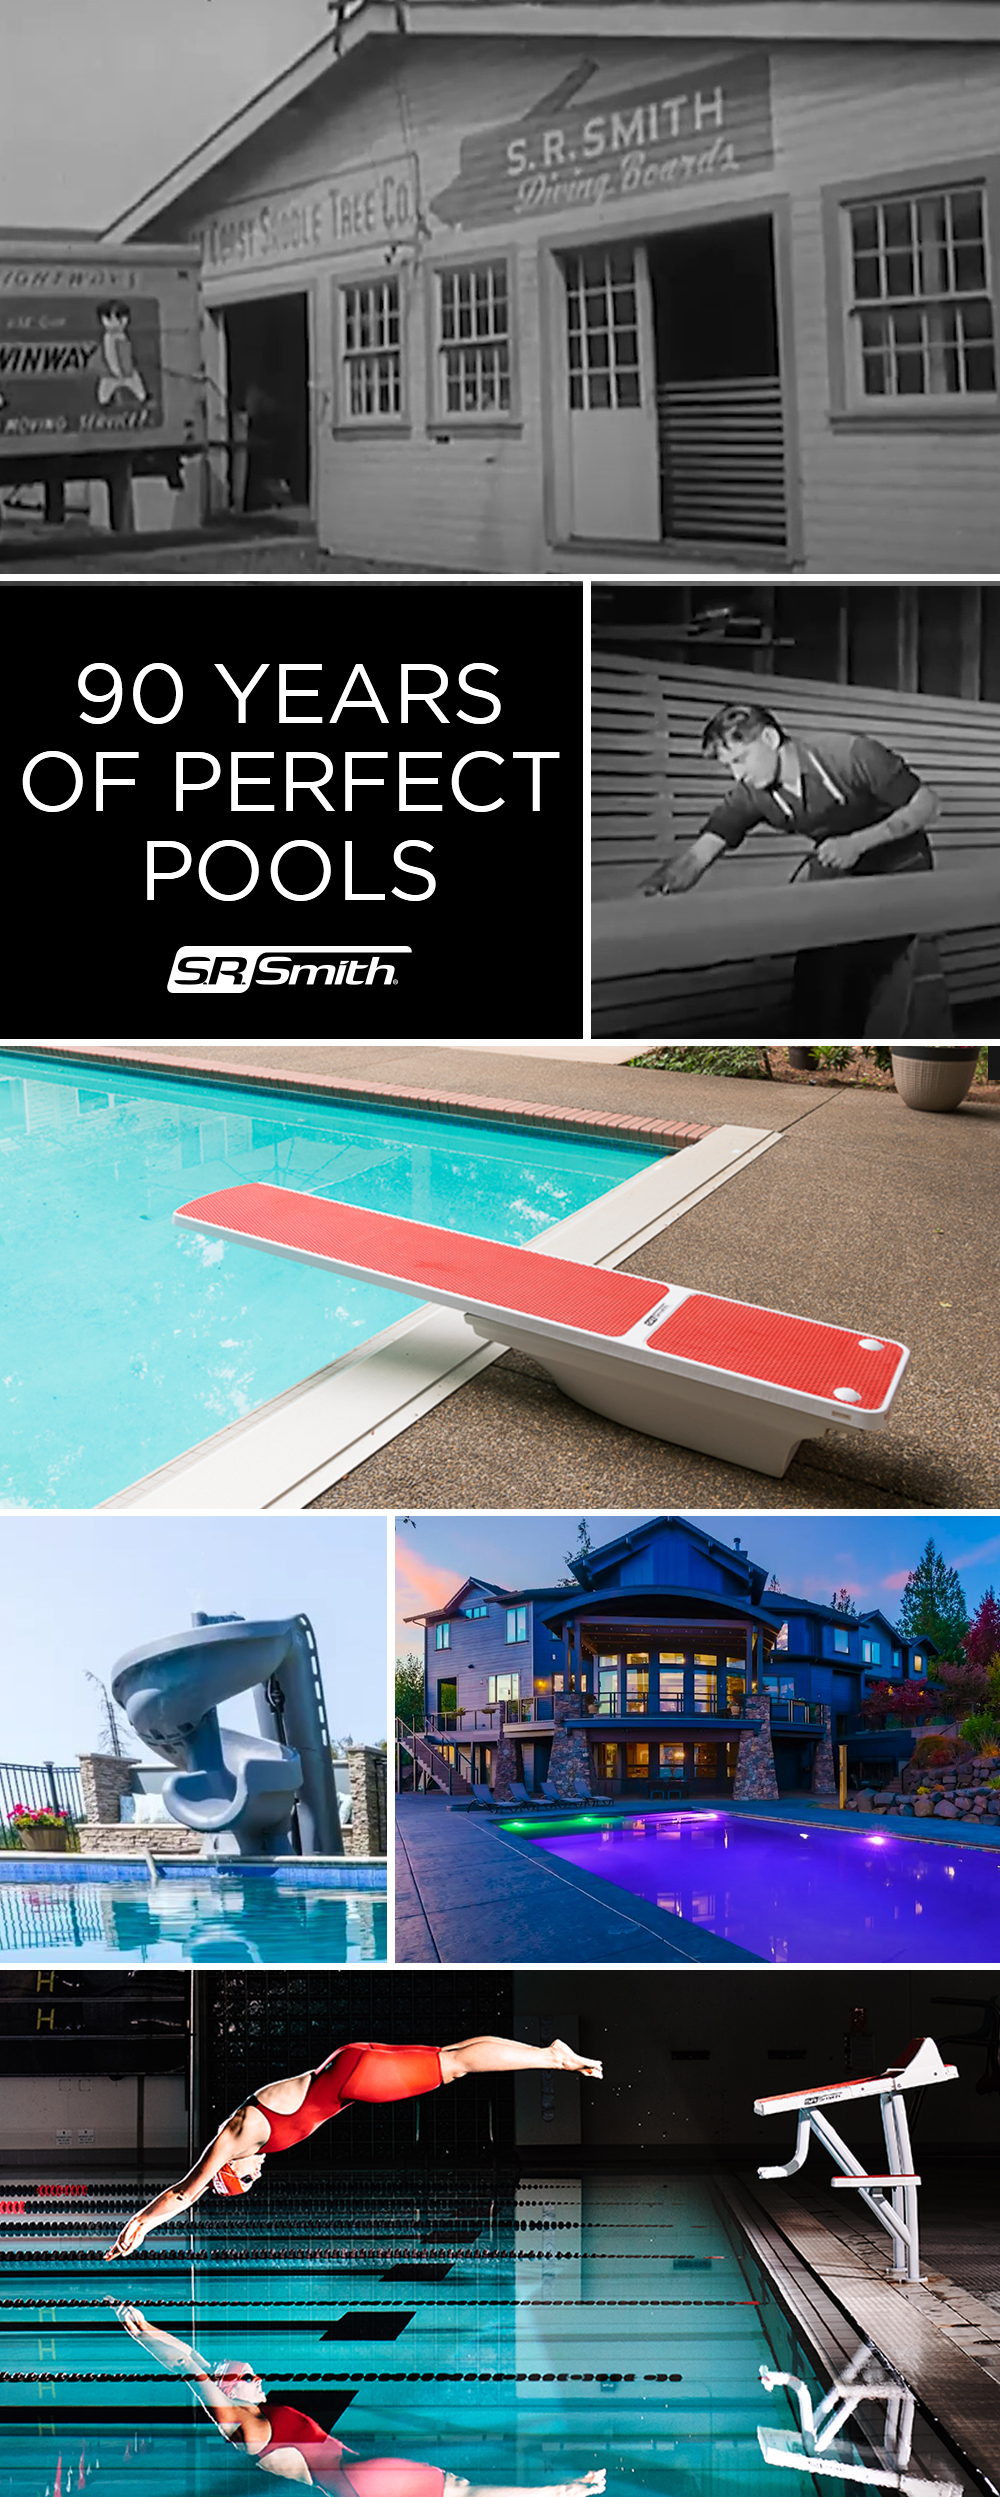 S.R.Smith Celebrates 90 Years of Manufacturing Pool Products